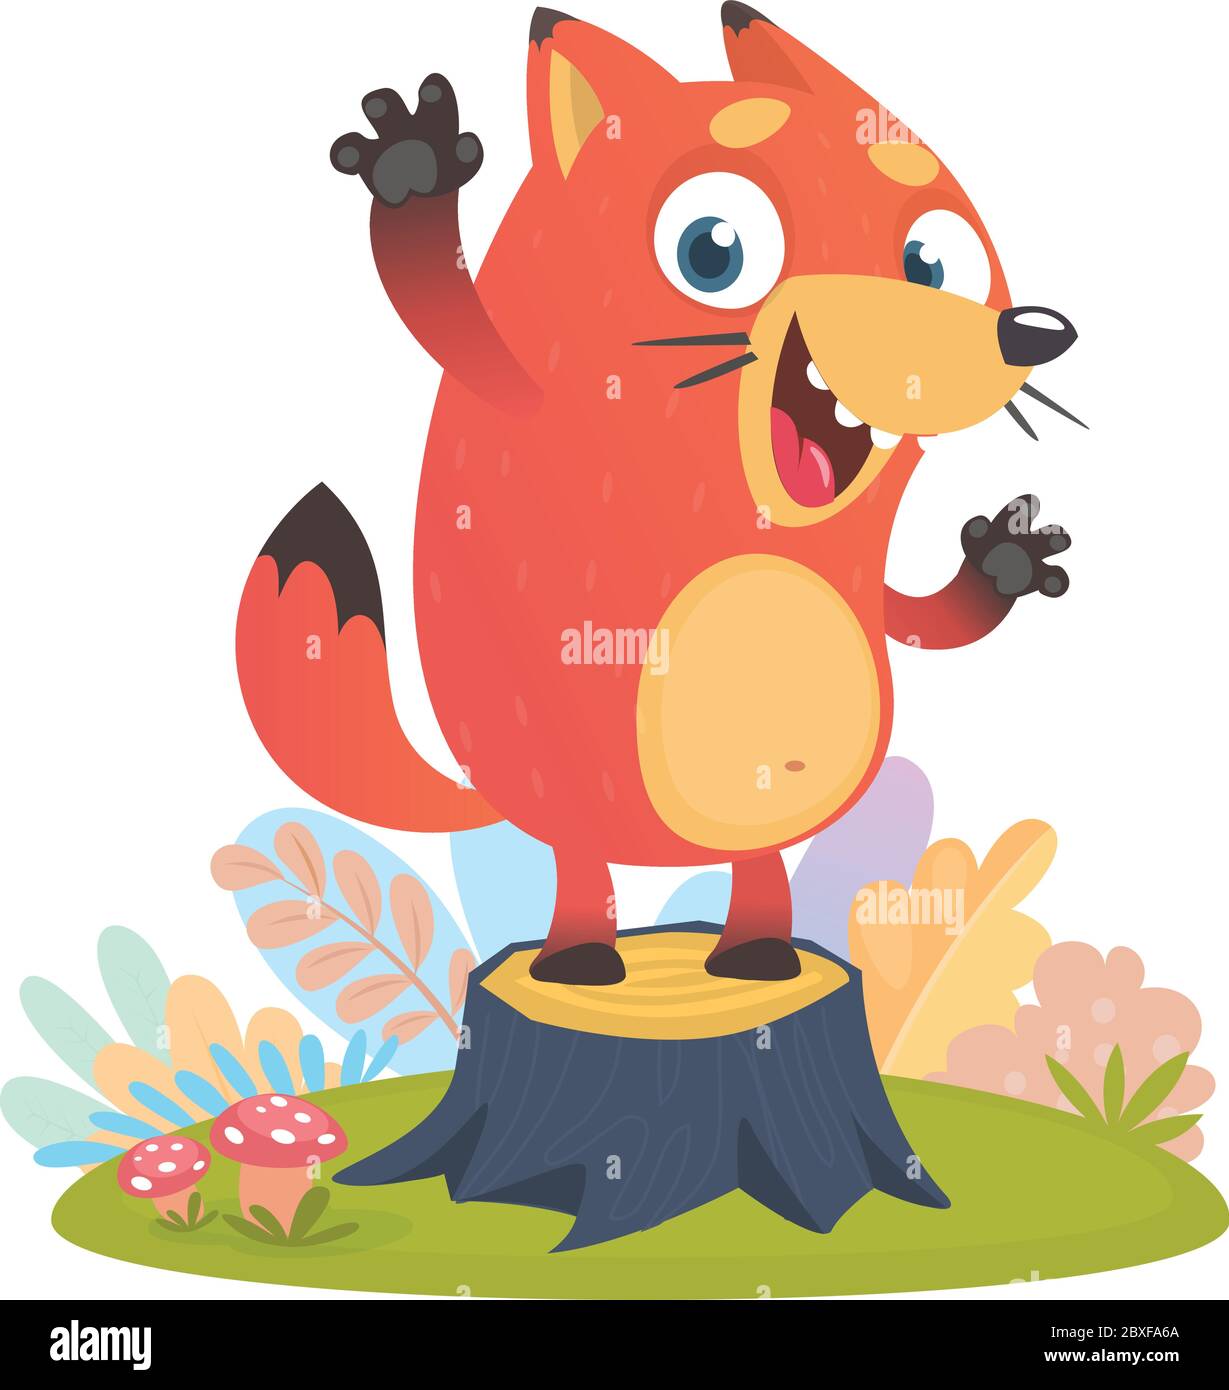 Cartoon cool little fox standing and waving on tree stump in summer season background with flower and mushrooms. Vector illustration isolated Stock Vector